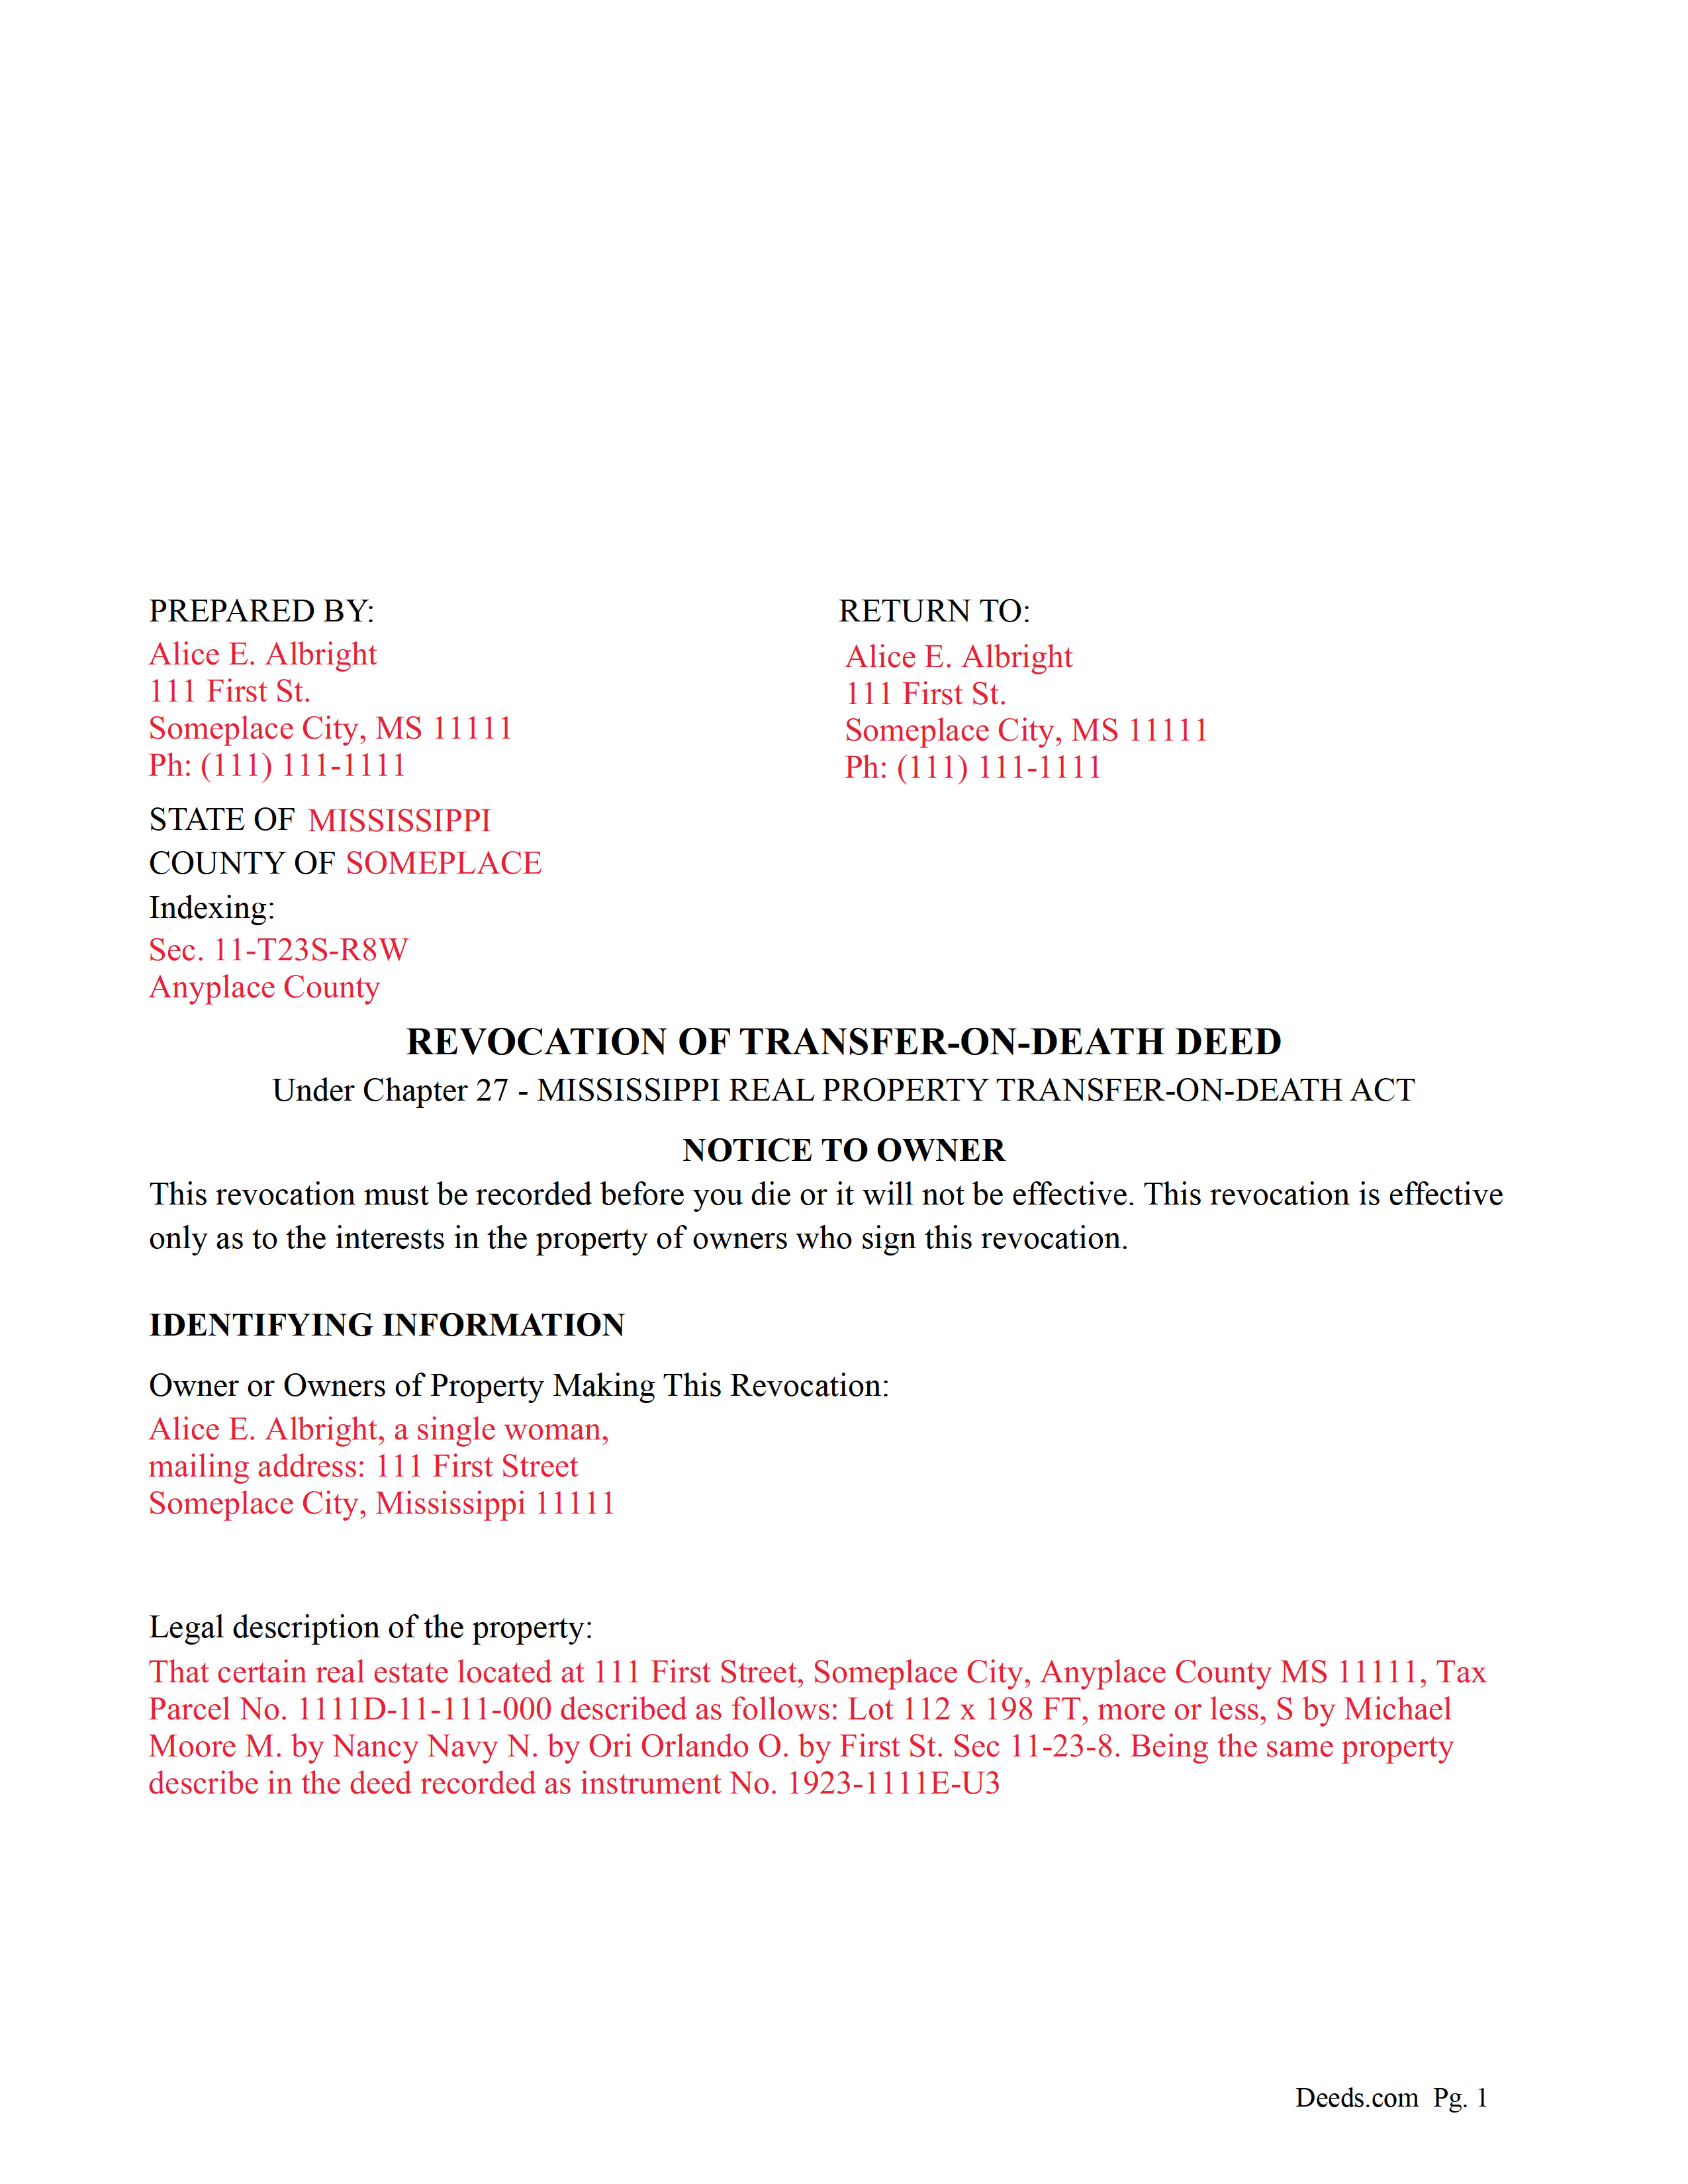 Completed Example of a Revocation of Transfer on Death Deed Document